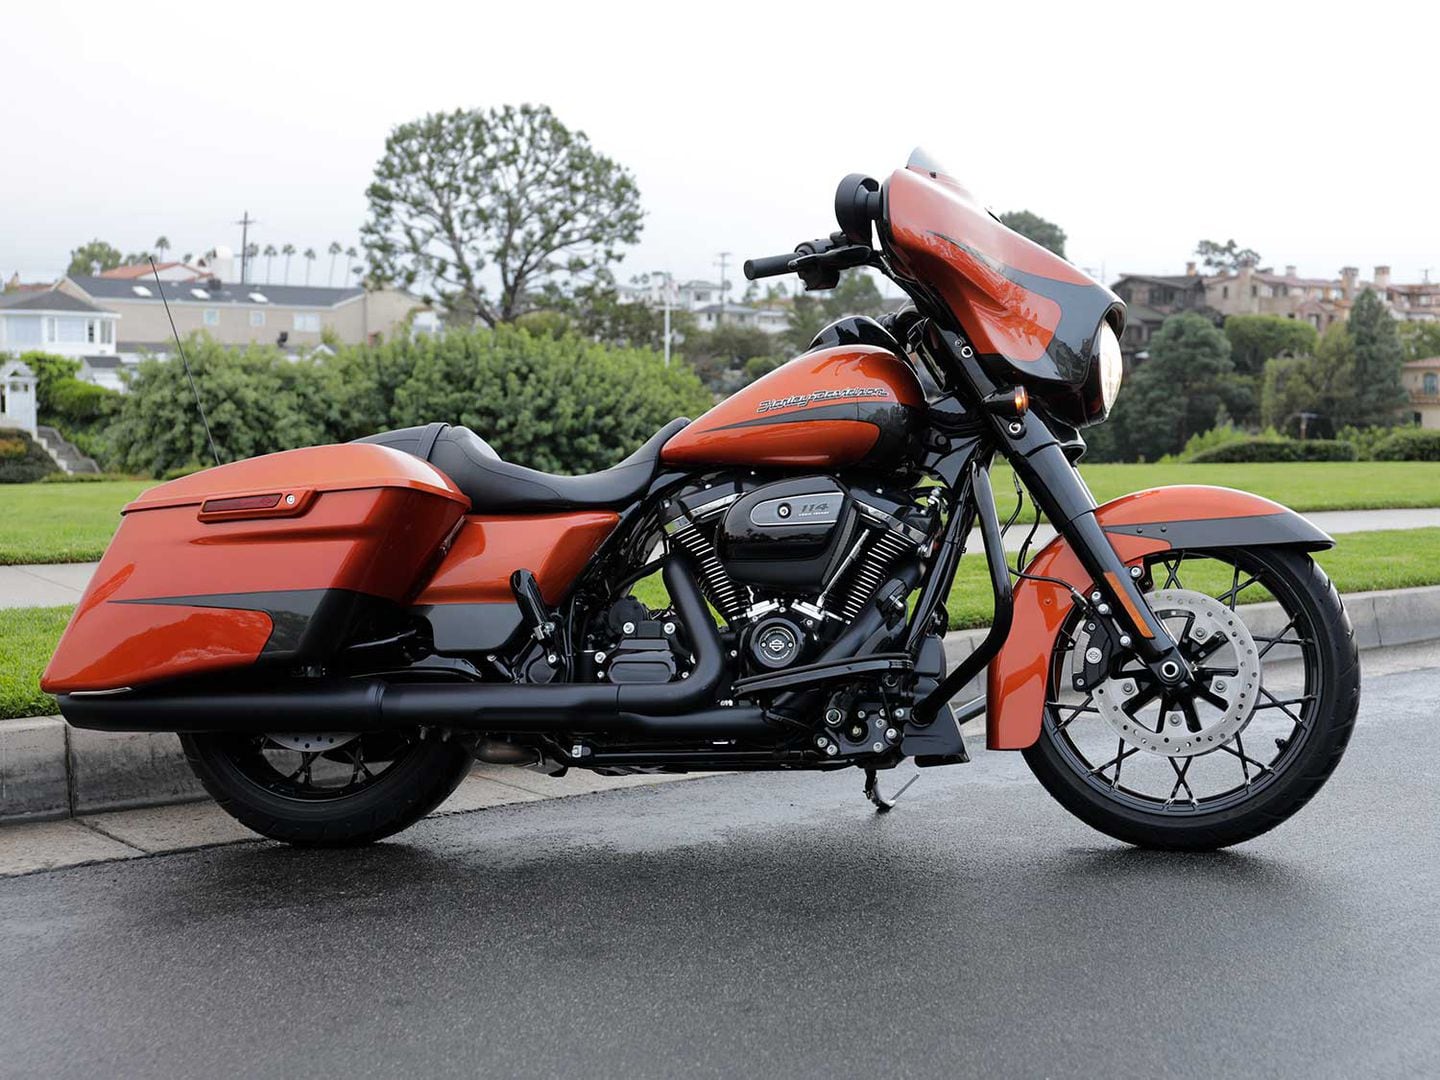 2020 Harley-Davidson Street Glide Special Review MC Commute